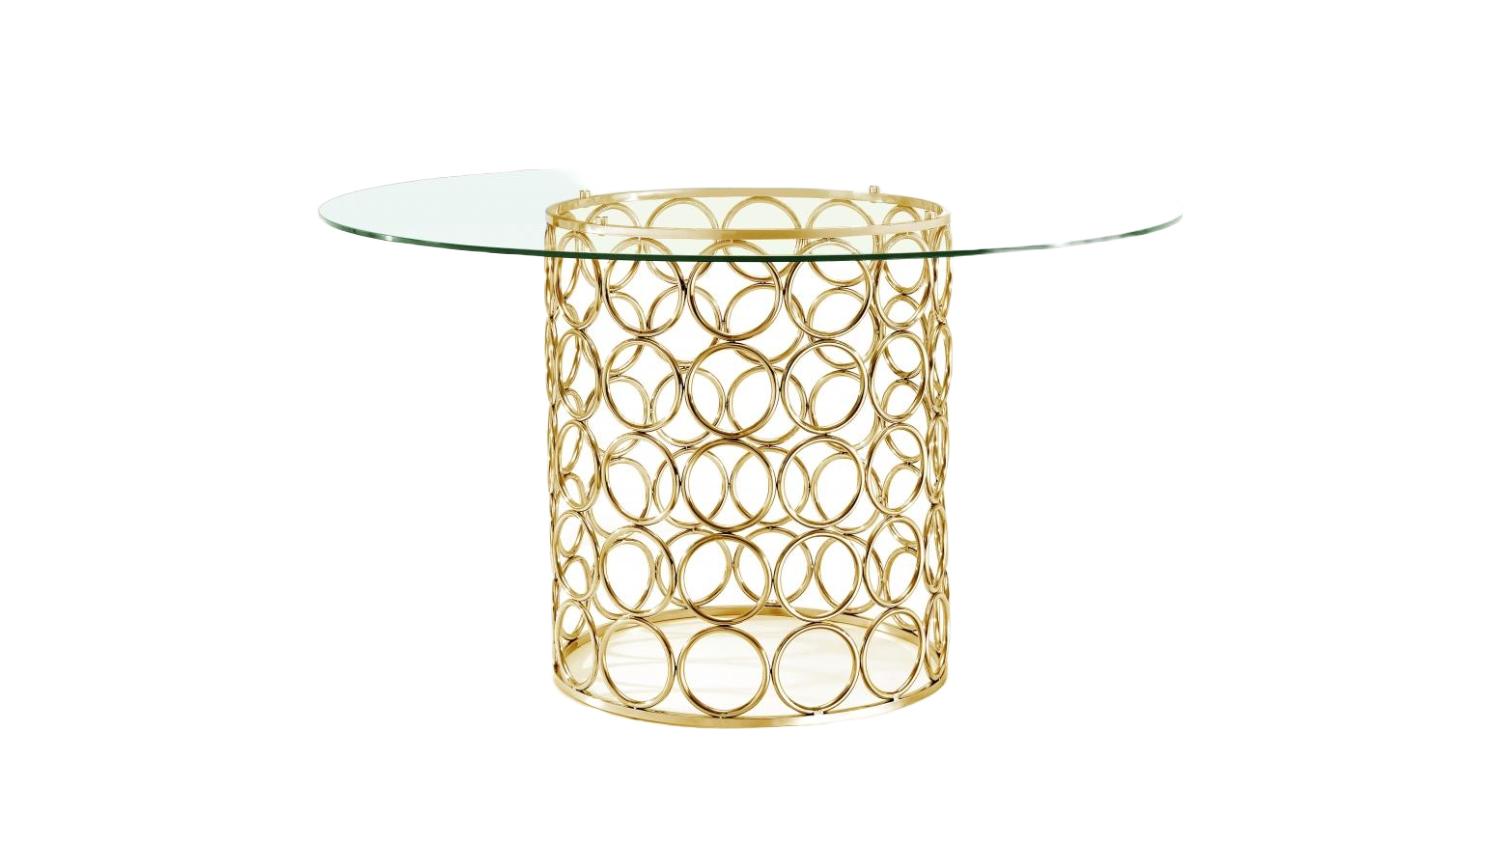 Contemporary, Modern Dining Table Opal 737-T 737-T in Gold 